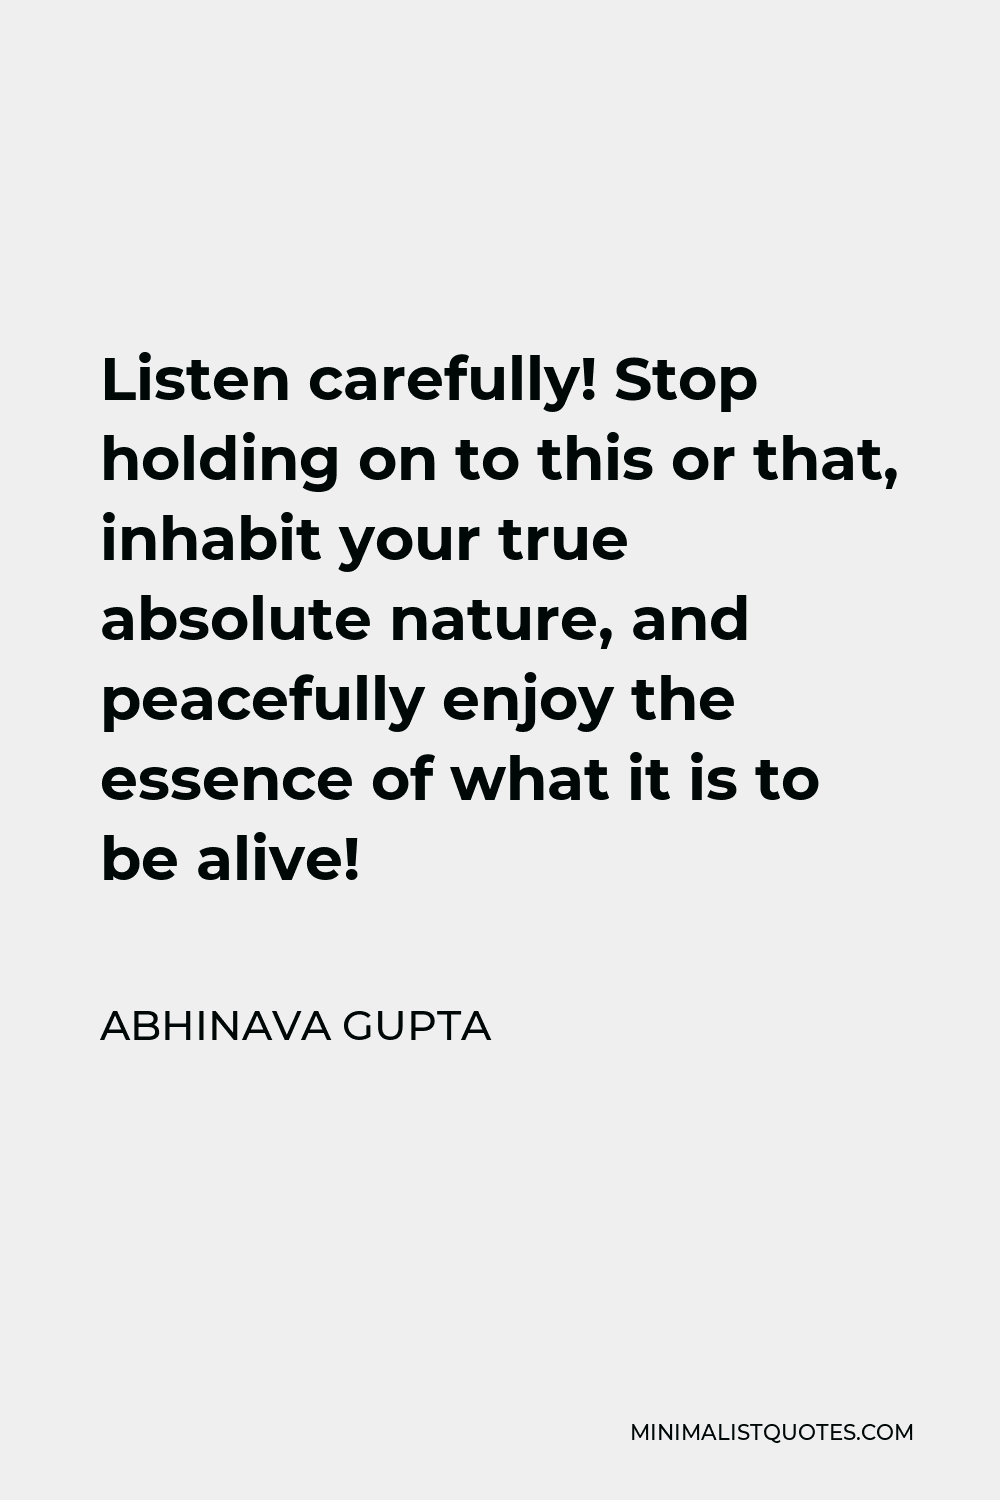 Abhinava Gupta Quote - Listen carefully! Stop holding on to this or that, inhabit your true absolute nature, and peacefully enjoy the essence of what it is to be alive!